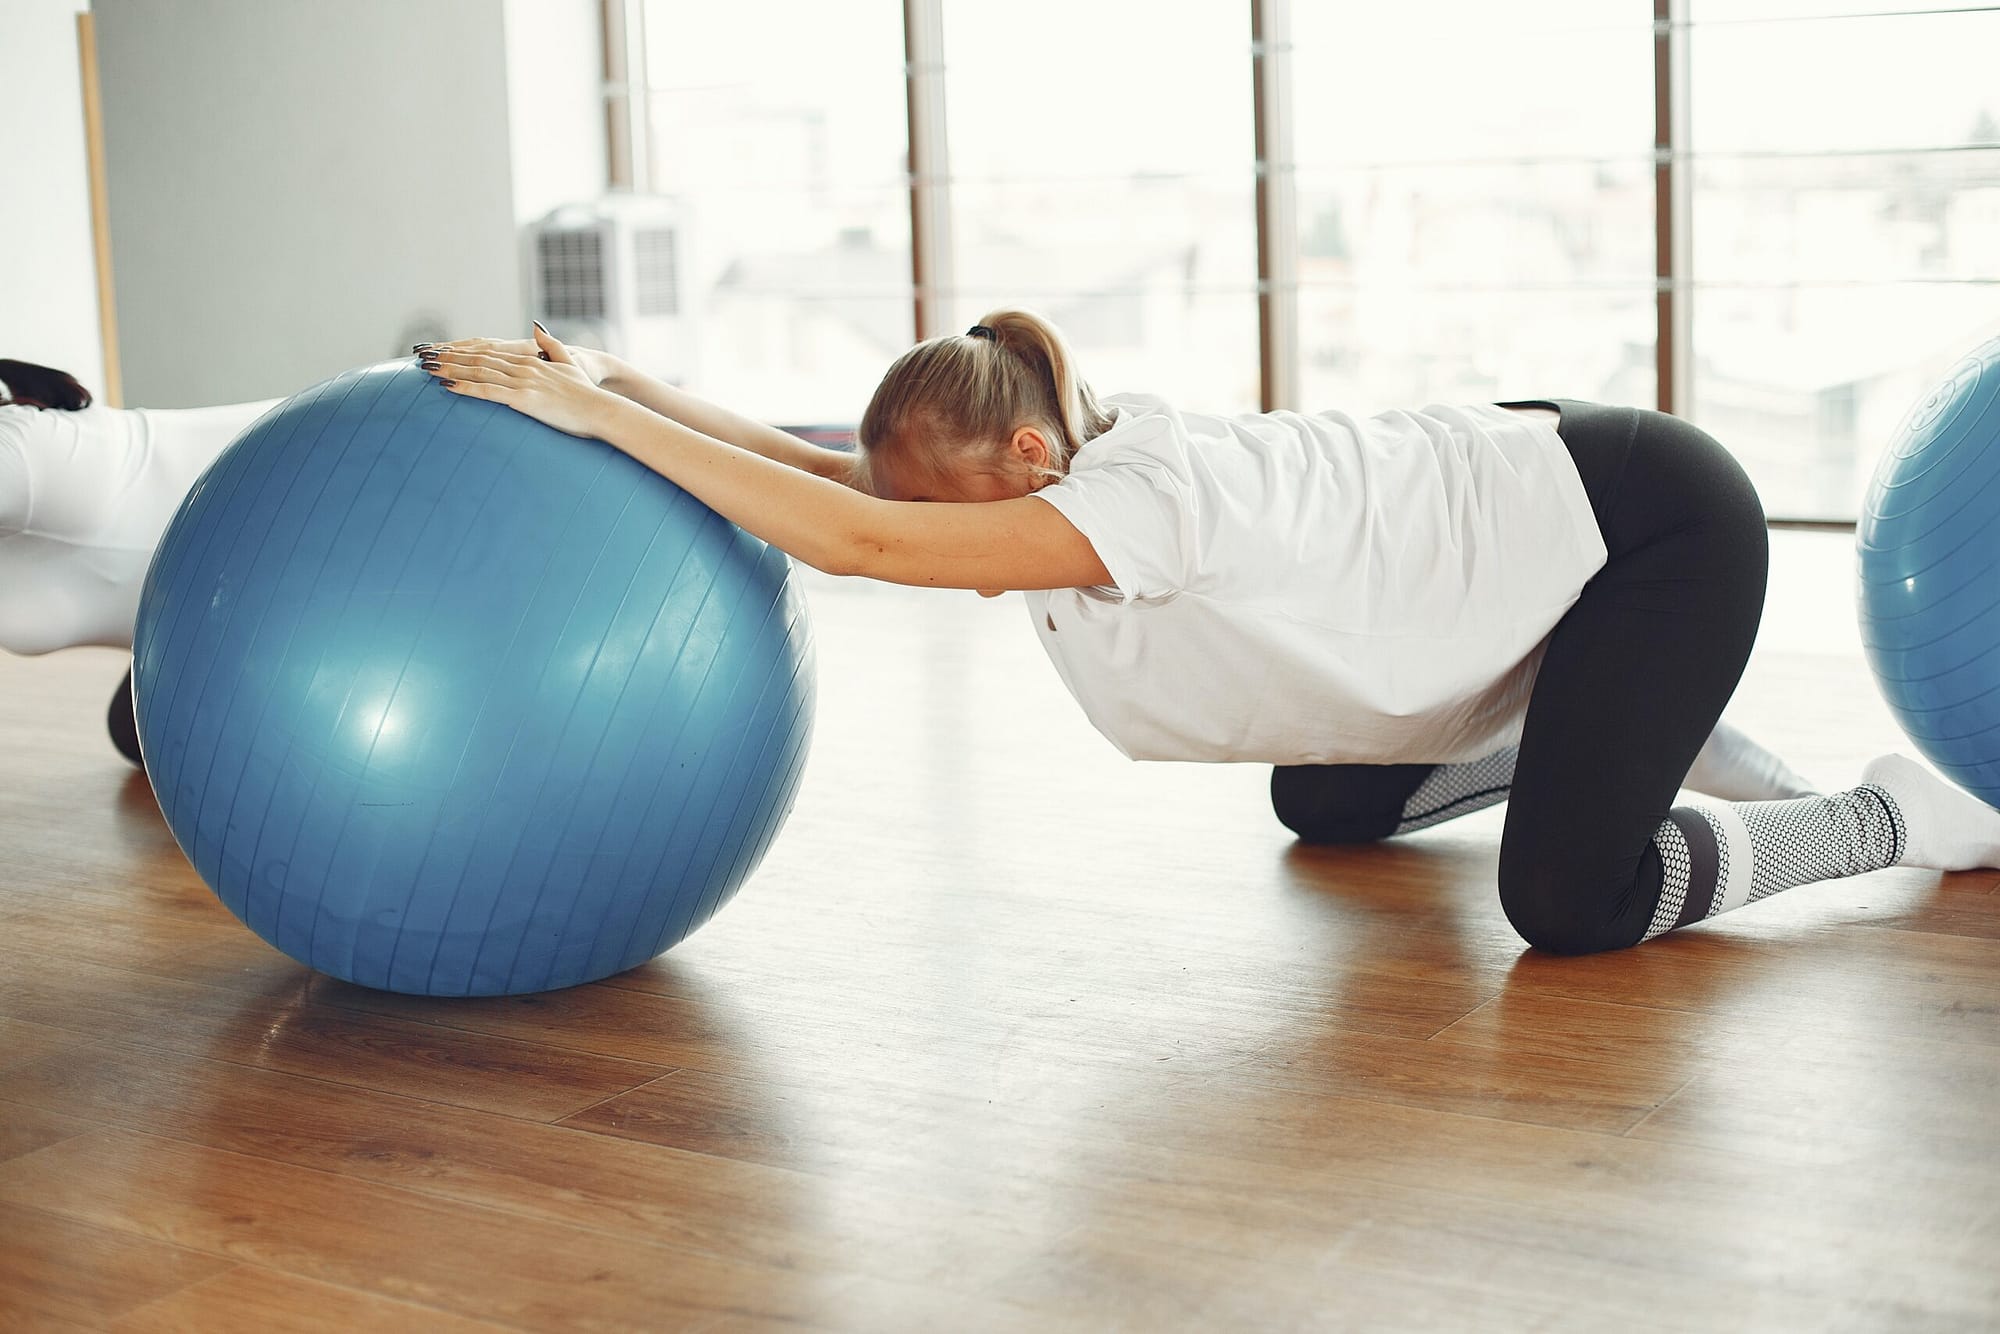 A pregnant women doing exercise with ball - exercises to widen pelvis for birth